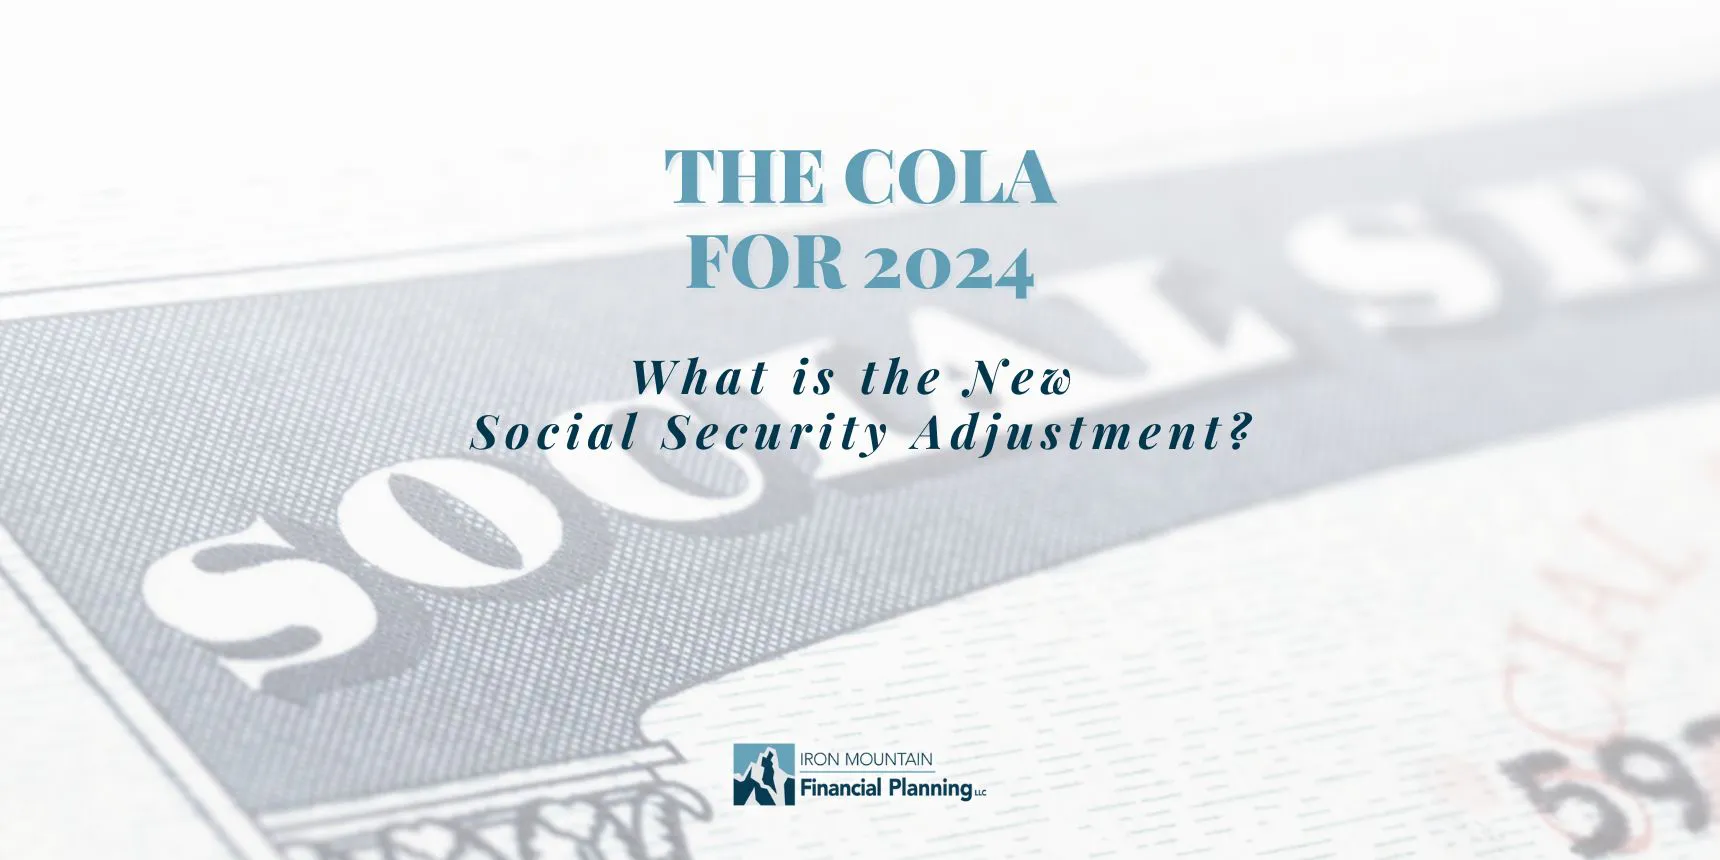 Social Security COLA Adjustment for 2024